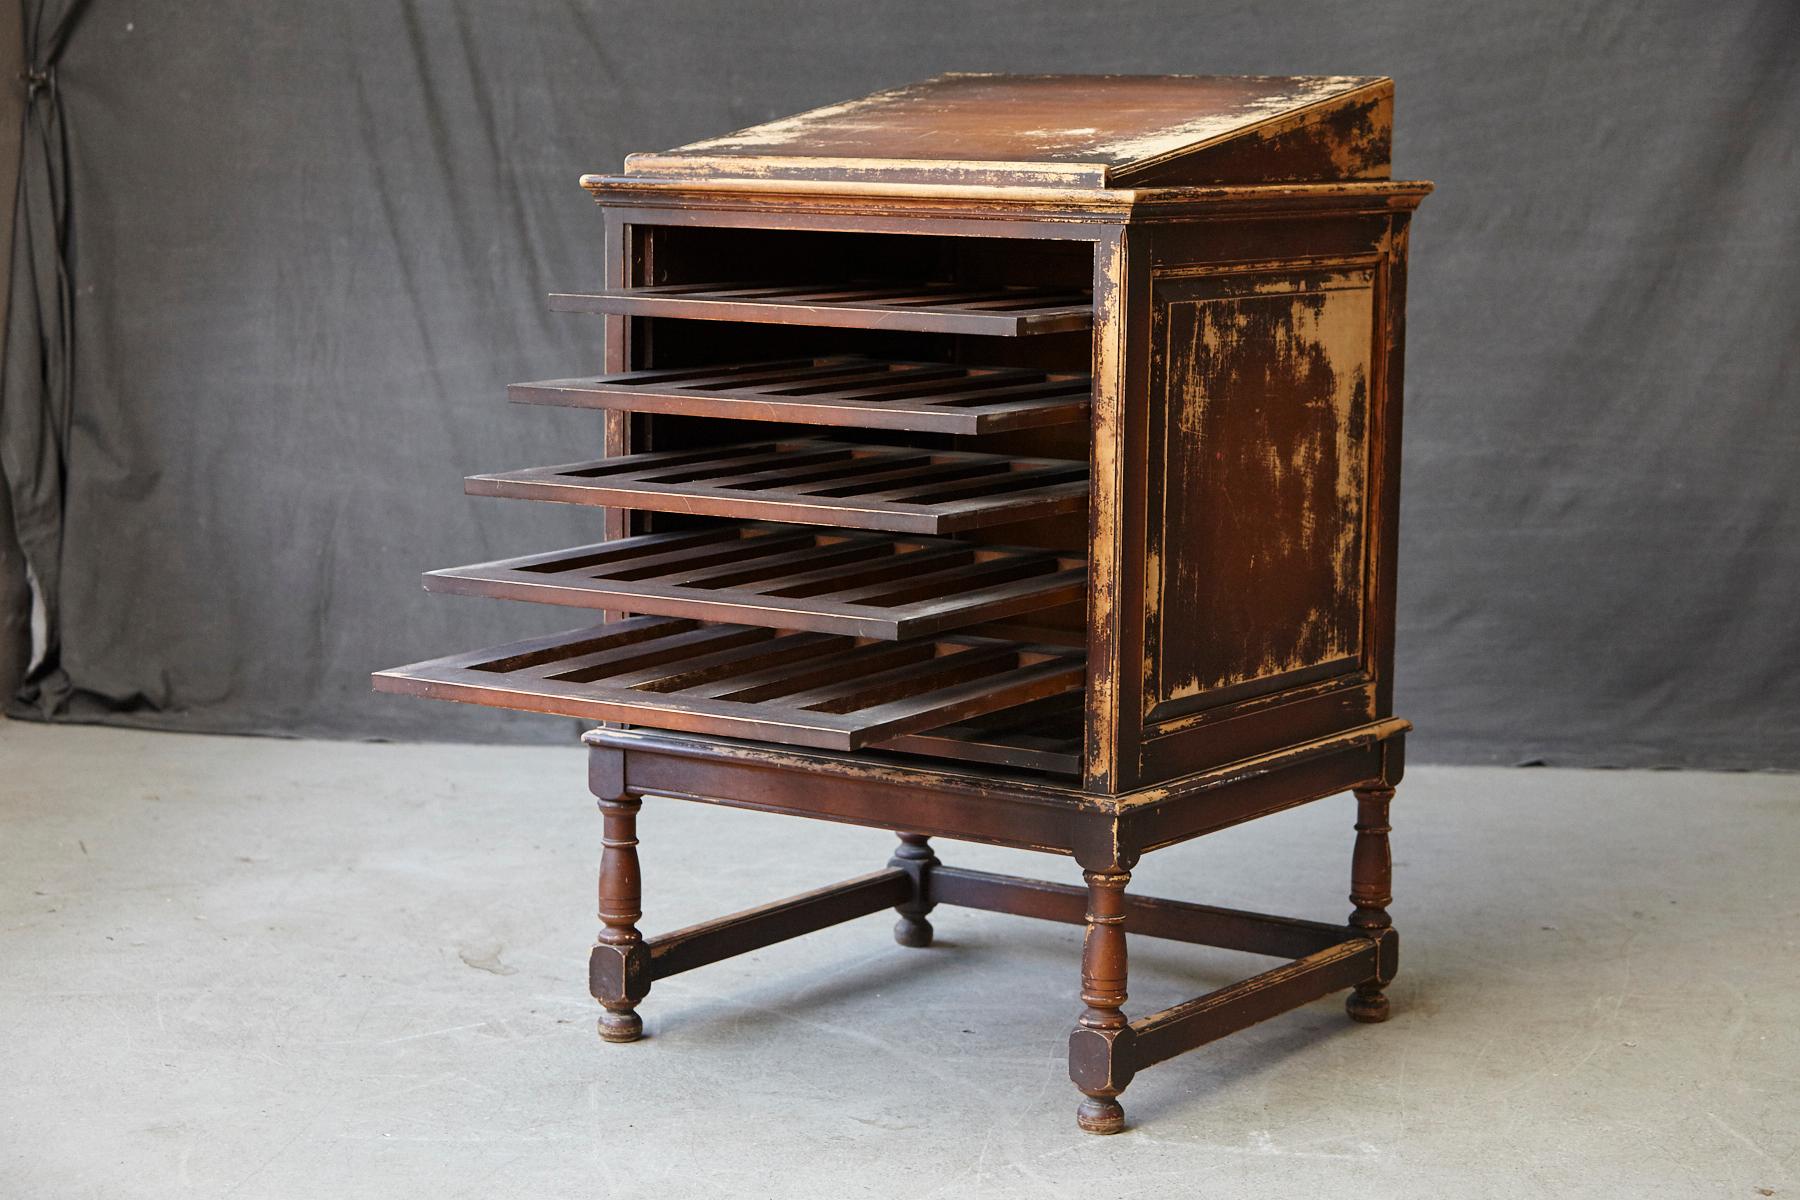 Very attractive early 20th century oak stand up desk with slant top, five sliding racks and paneled sides, relief brass placard 'LB Library Bureau Makers LB' on the backside of the desk.
Sturdy and heavy quality construction. The desk has been